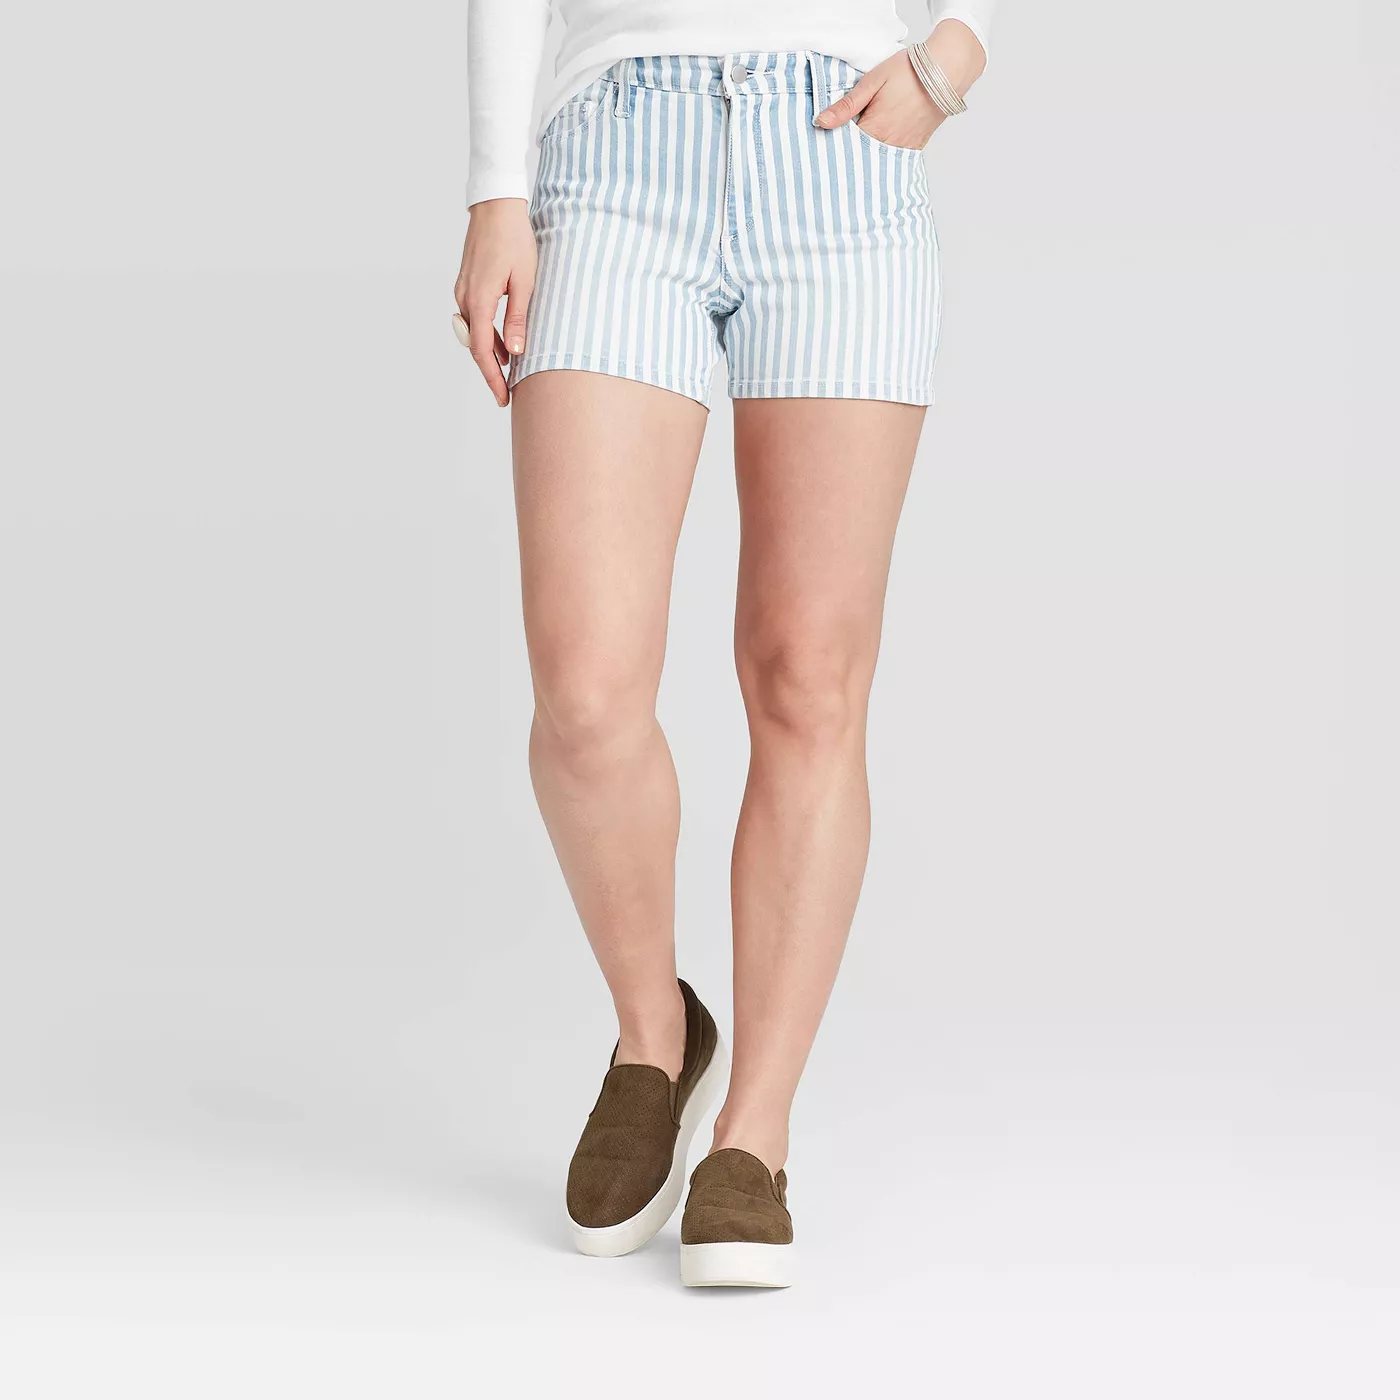 Women's High-Rise Stripped Jean Shorts - Universal Thread™ Light Blue - image 1 of 3